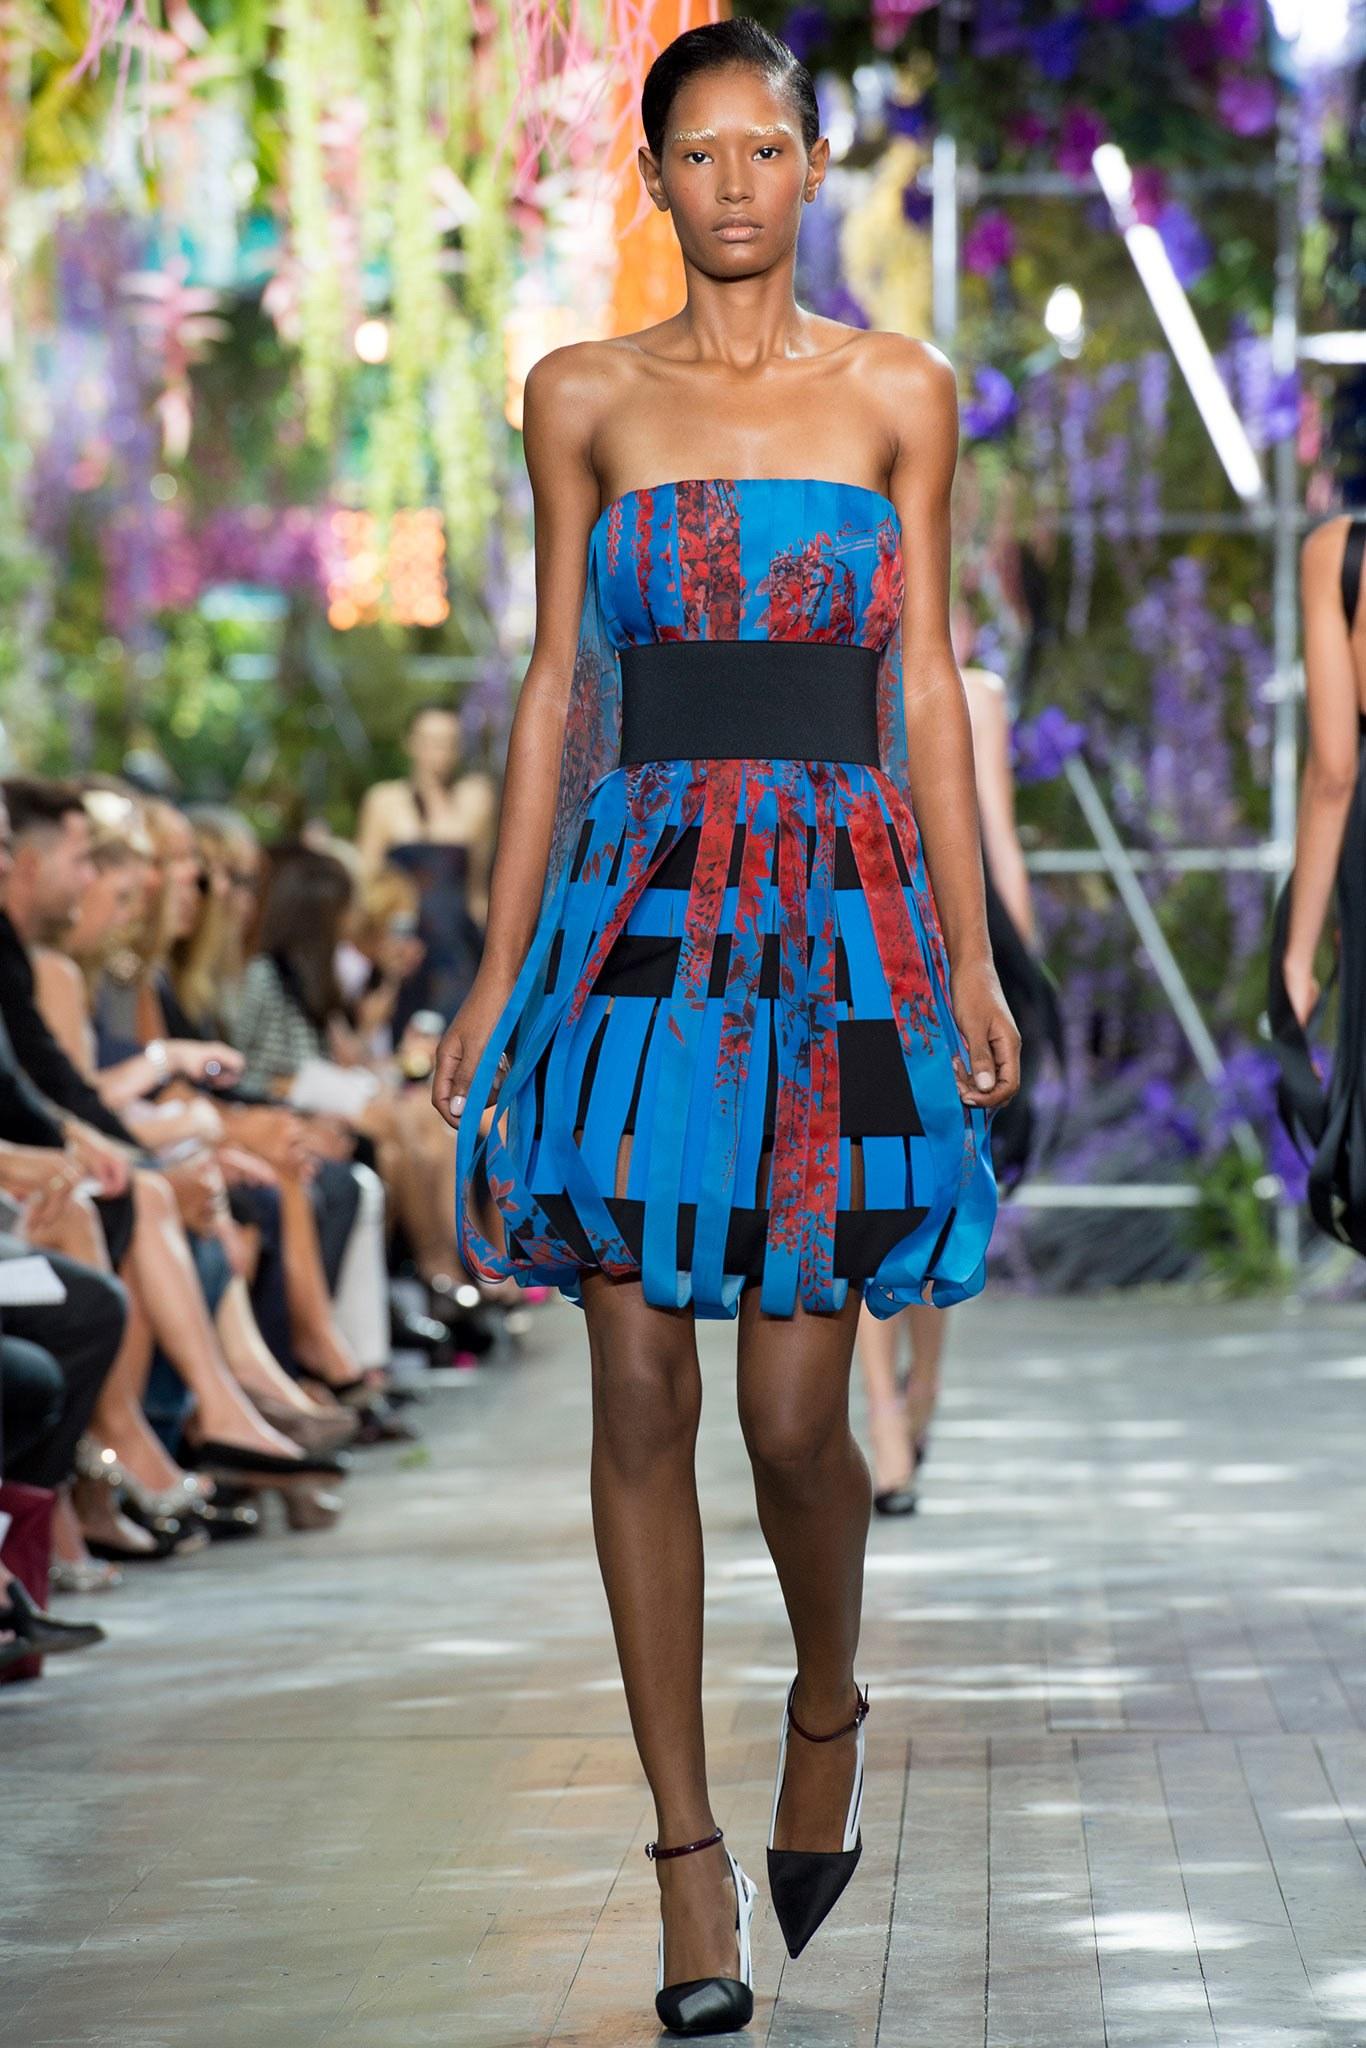 Christian Dior By Raf Simons strapless cocktail dress features a blue and black striped shift body with red floral print ribbon overlay and built in bustier. Wear it with included elastic belt or on its own. Look 37 of Spring/Summer 2014 Collection.